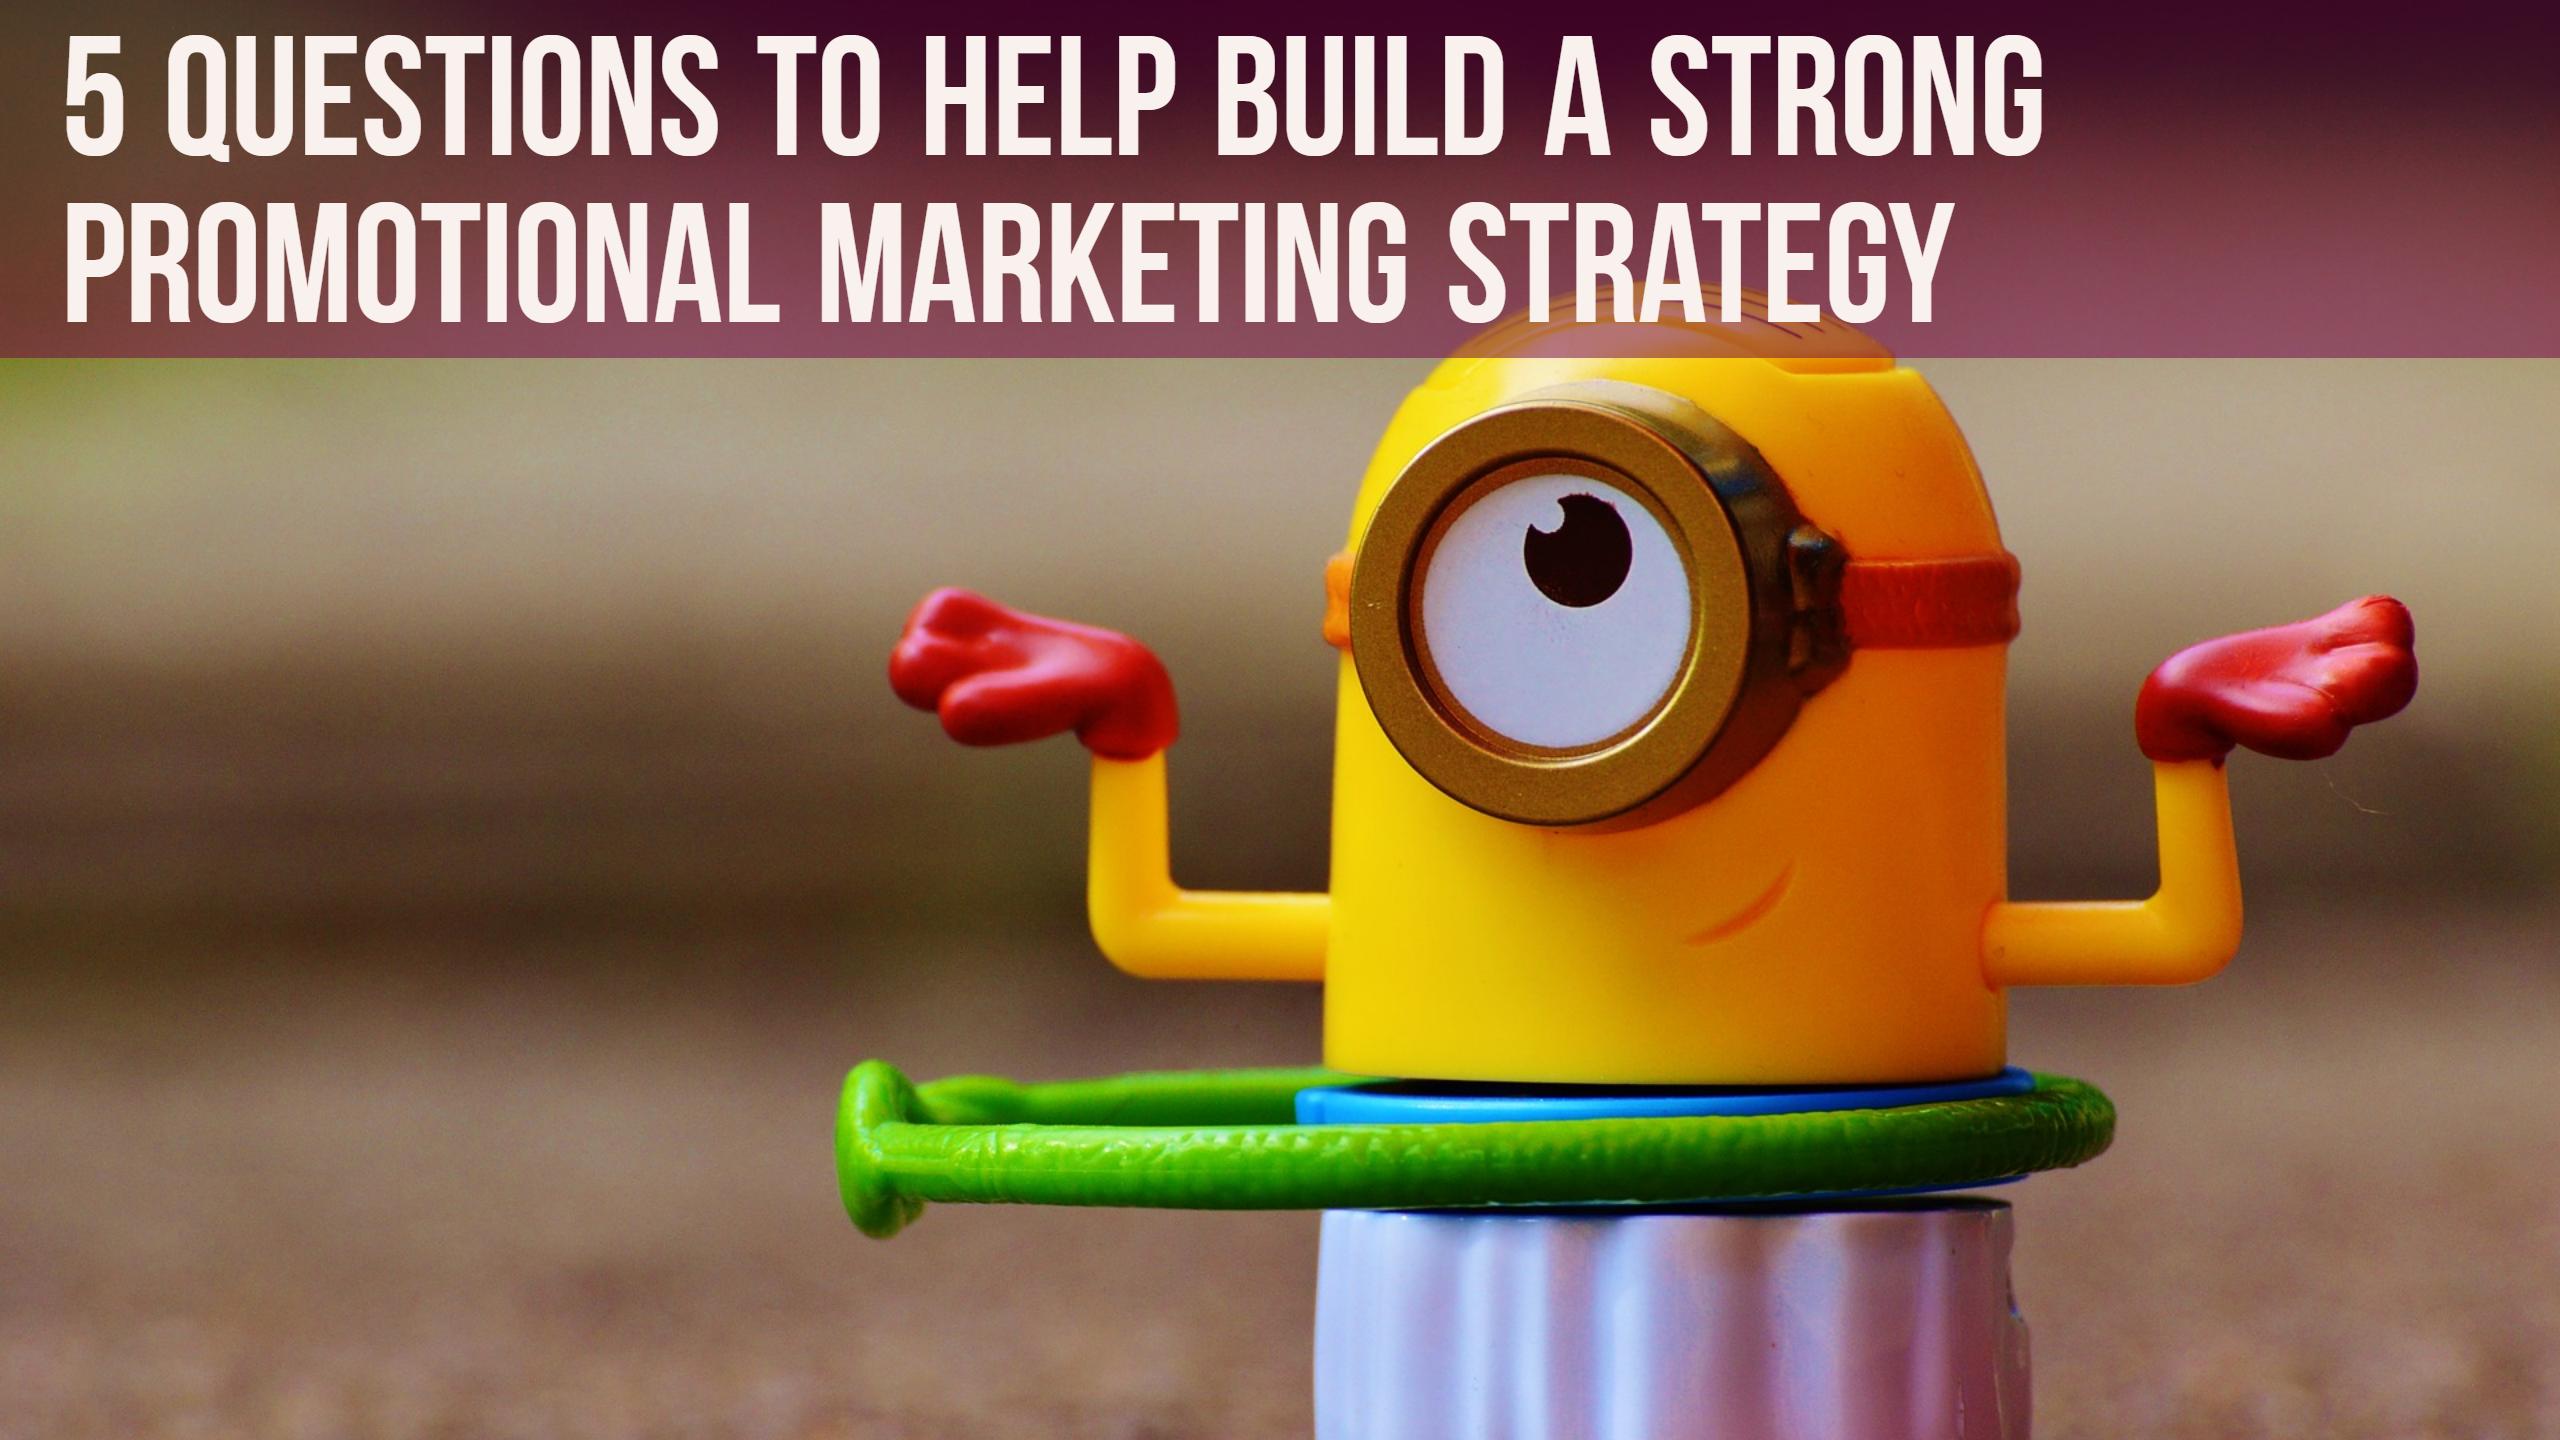 5 Questions to Help Build a Strong Promotional Marketing Strategy